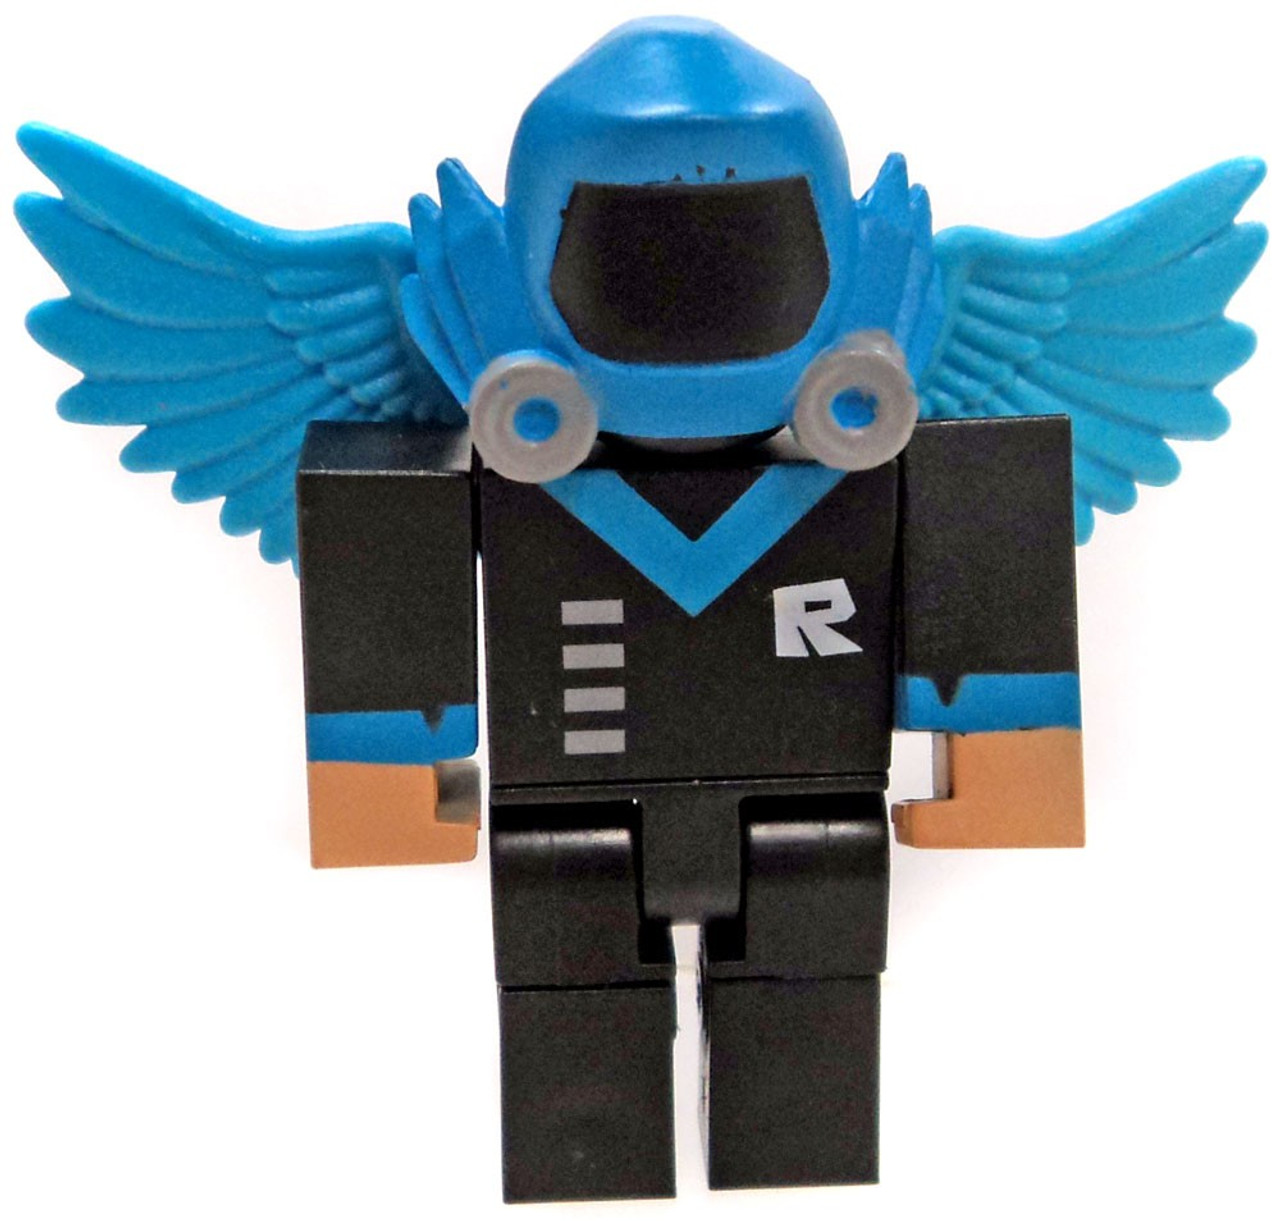 Overseer Wings Codes For Roblox Free Robux Hack That Works 2018 Crf450 - blizzard roblox assassin wikia fandom powered by wikia